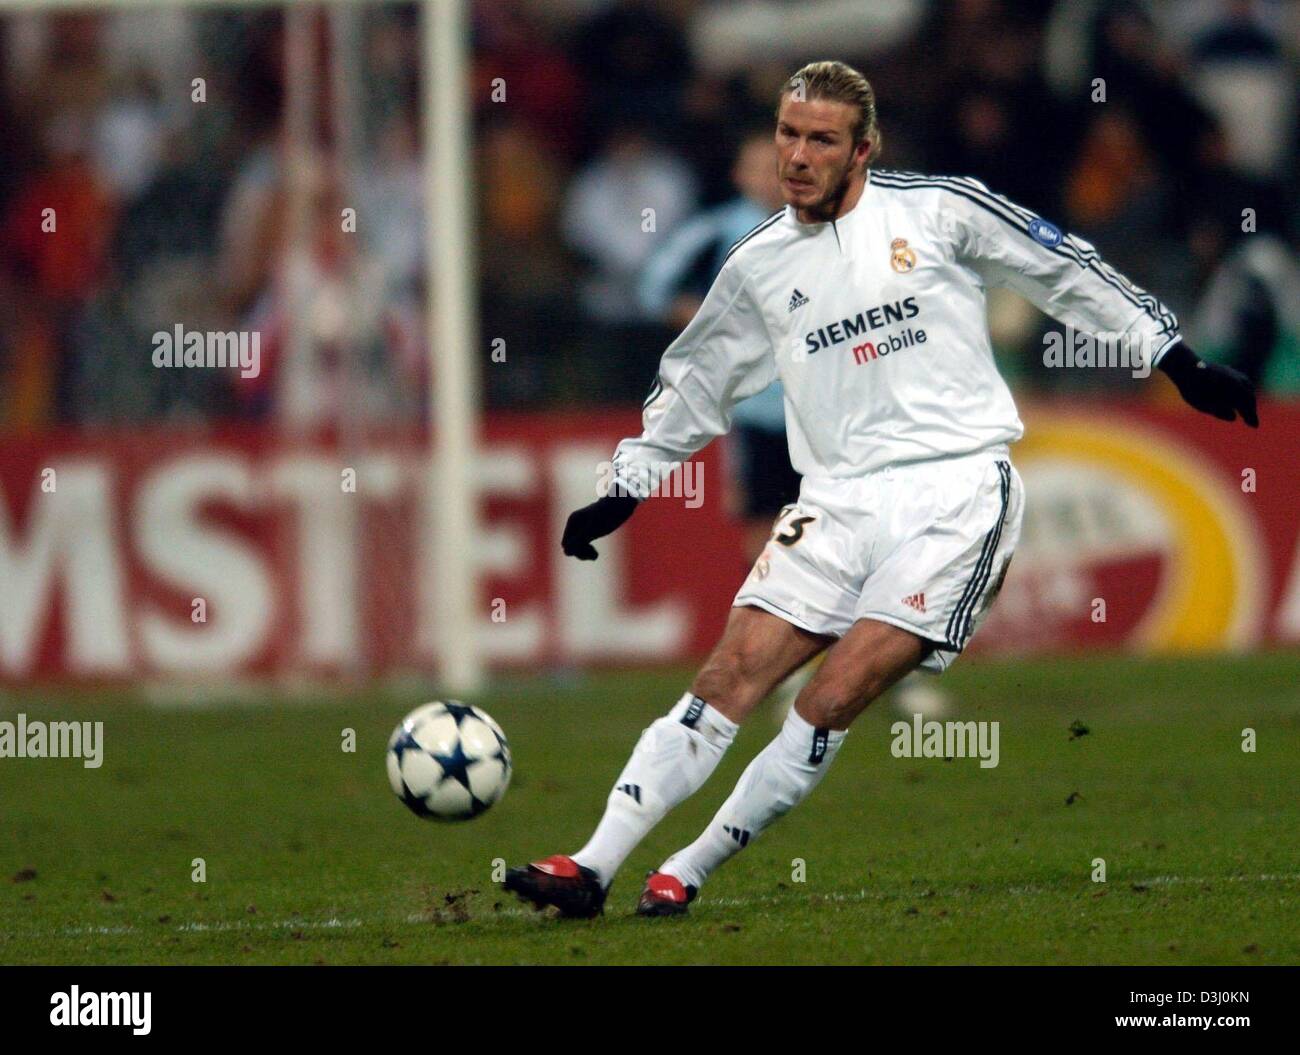 real madrid 2004 champions league